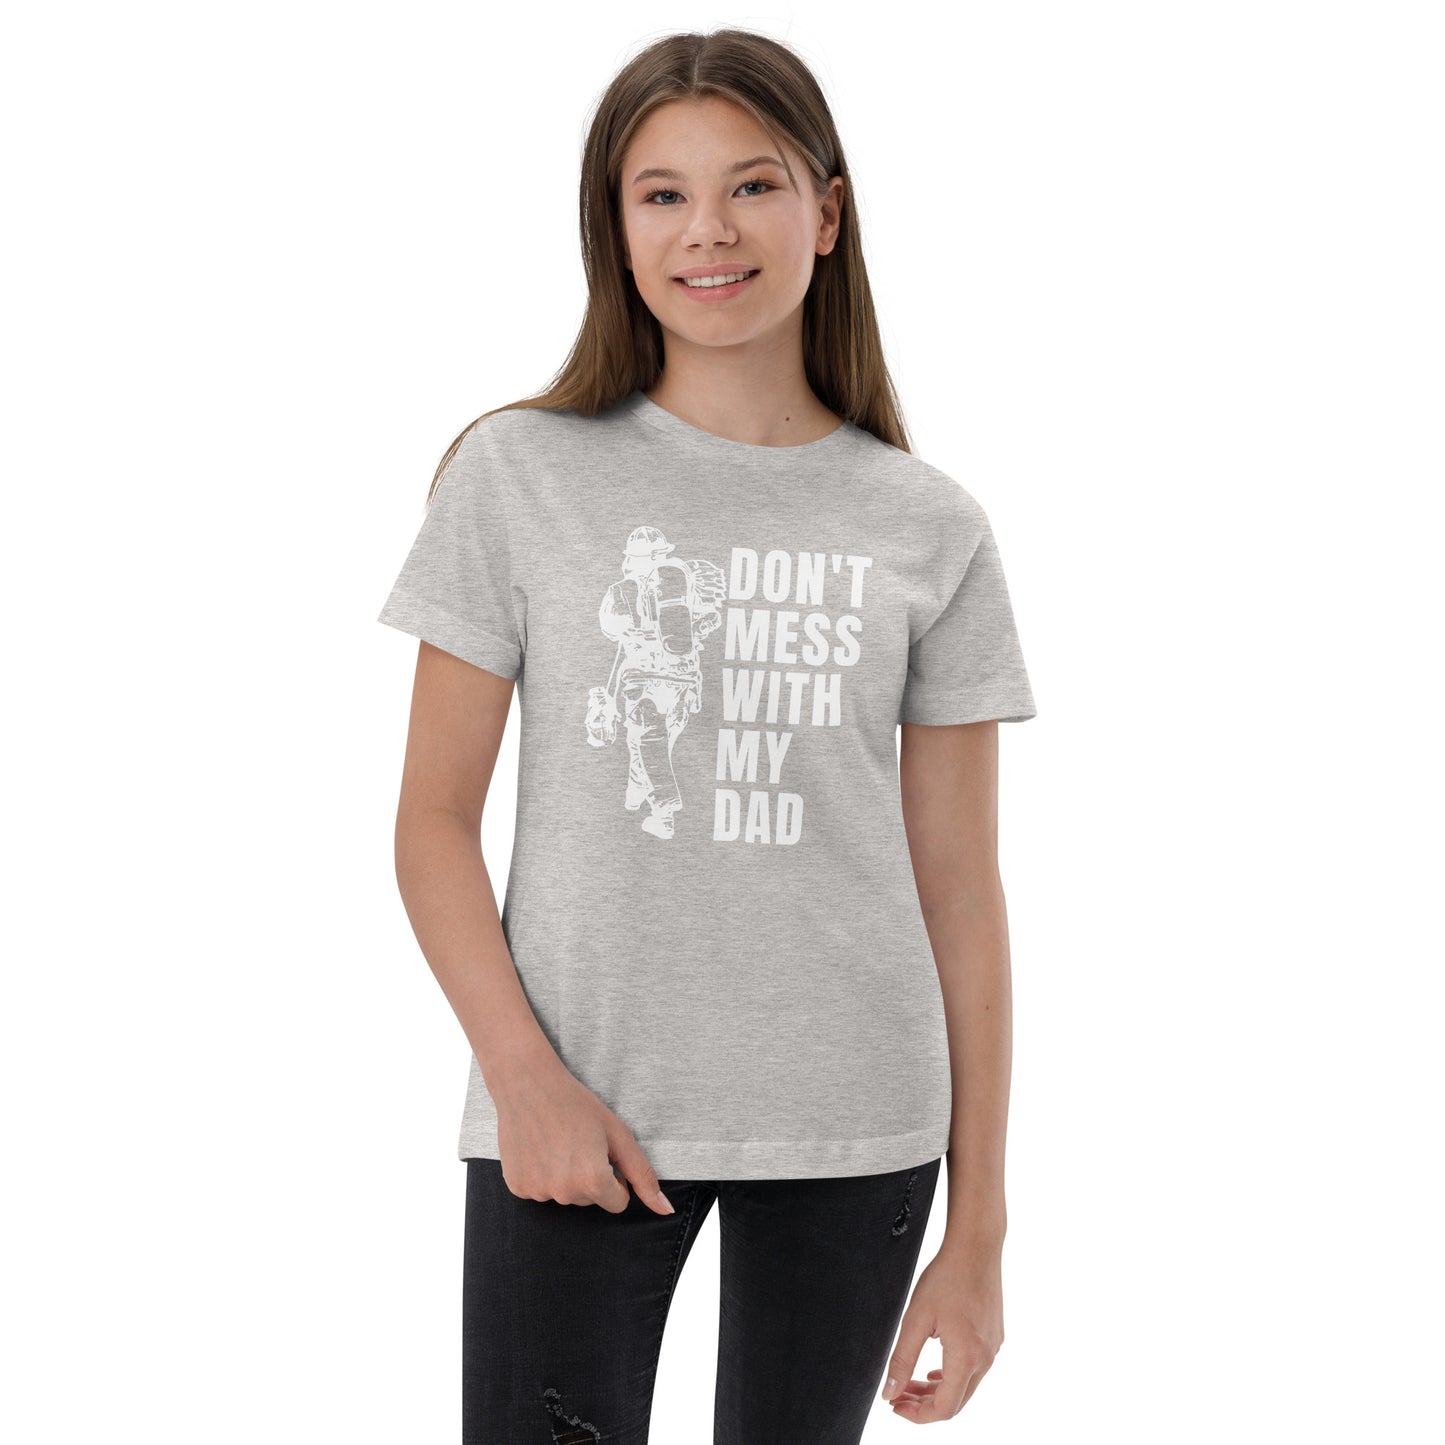 Kids Don't Mess with my Dad, Firefighter shirt. Light Grey youth shirt.